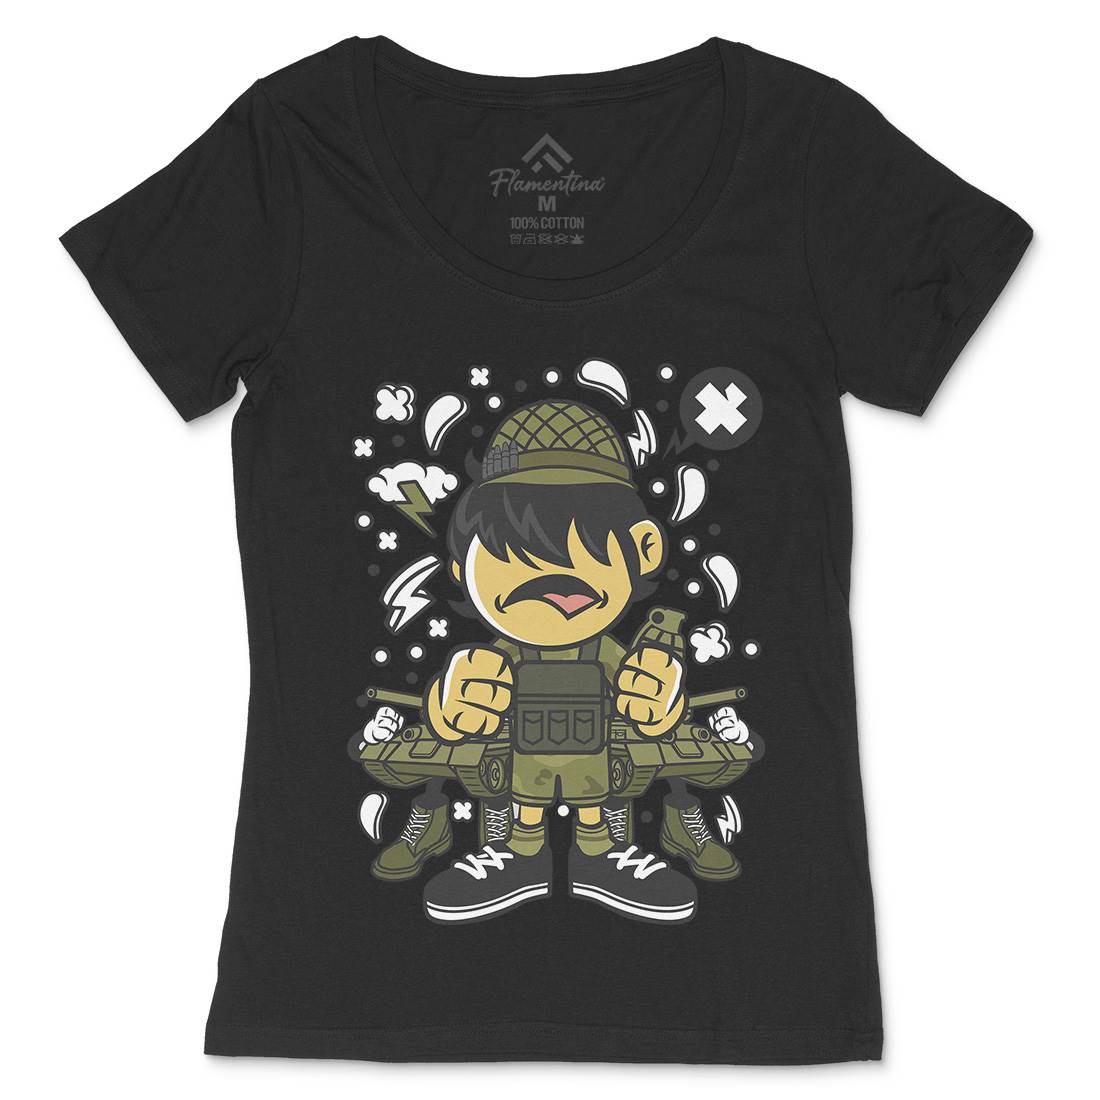 Soldier Kid Womens Scoop Neck T-Shirt Army C253